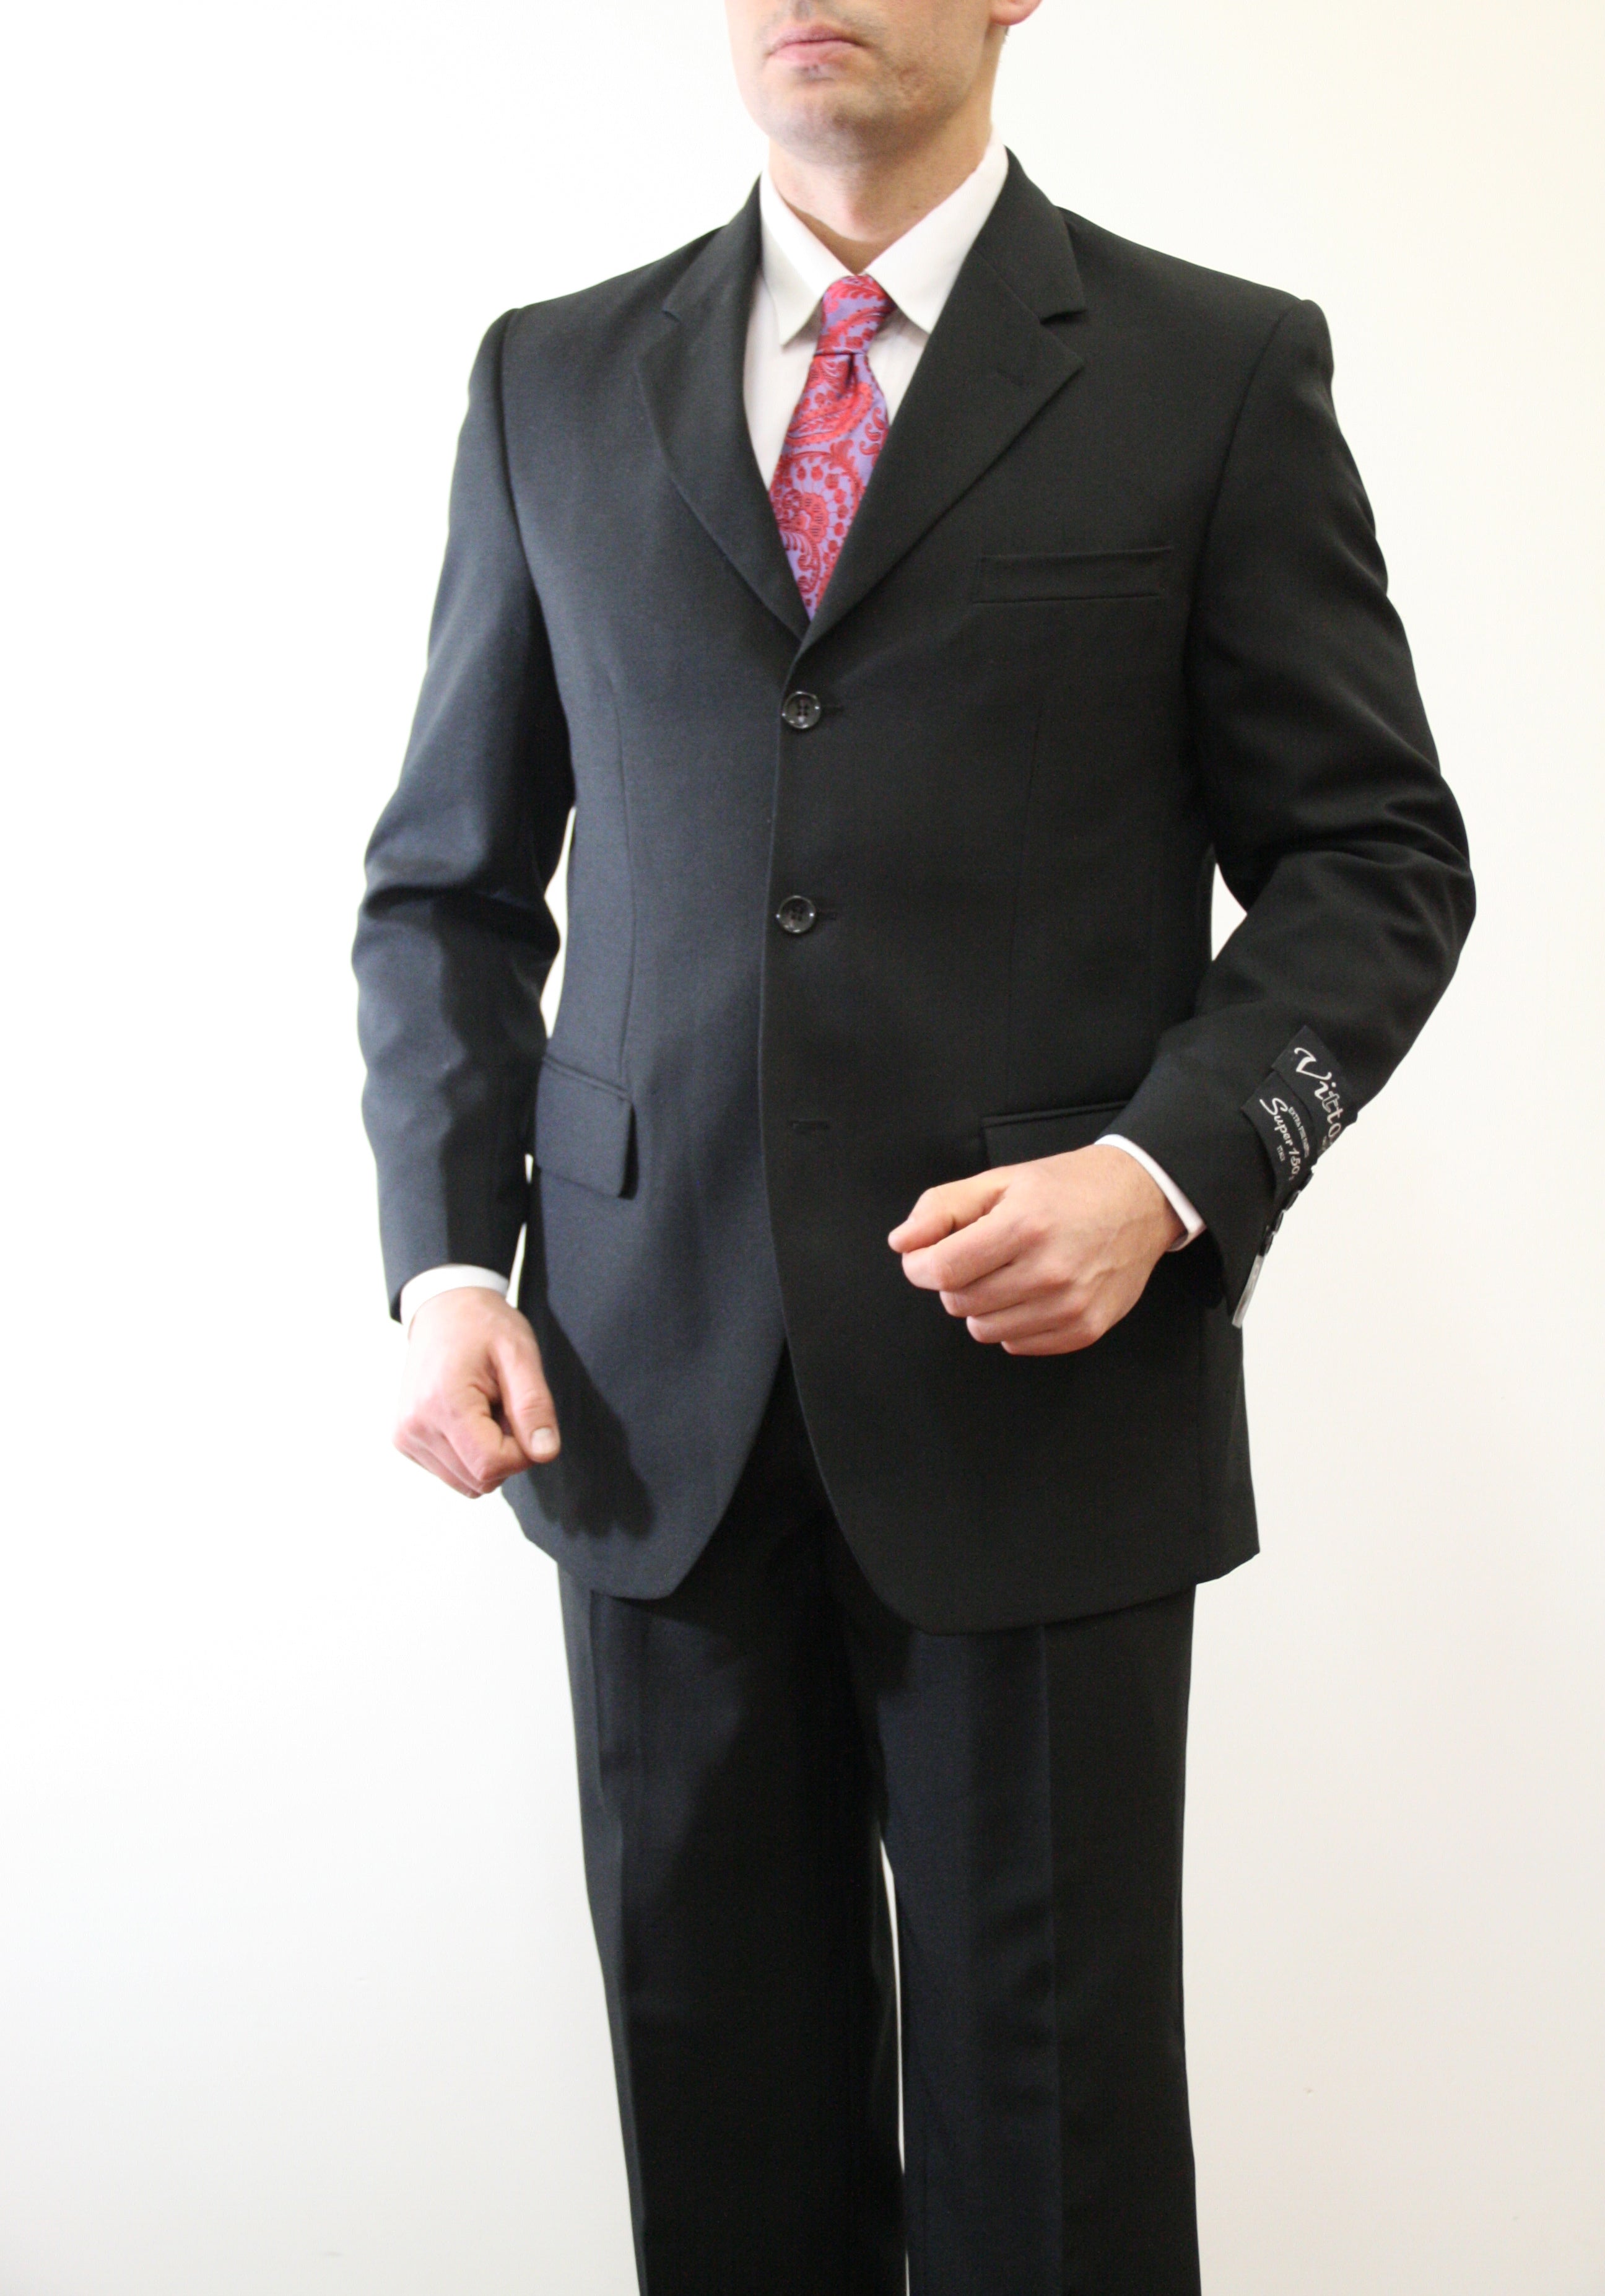 Black Suit For Men Formal Suits For All Ocassions M097-01